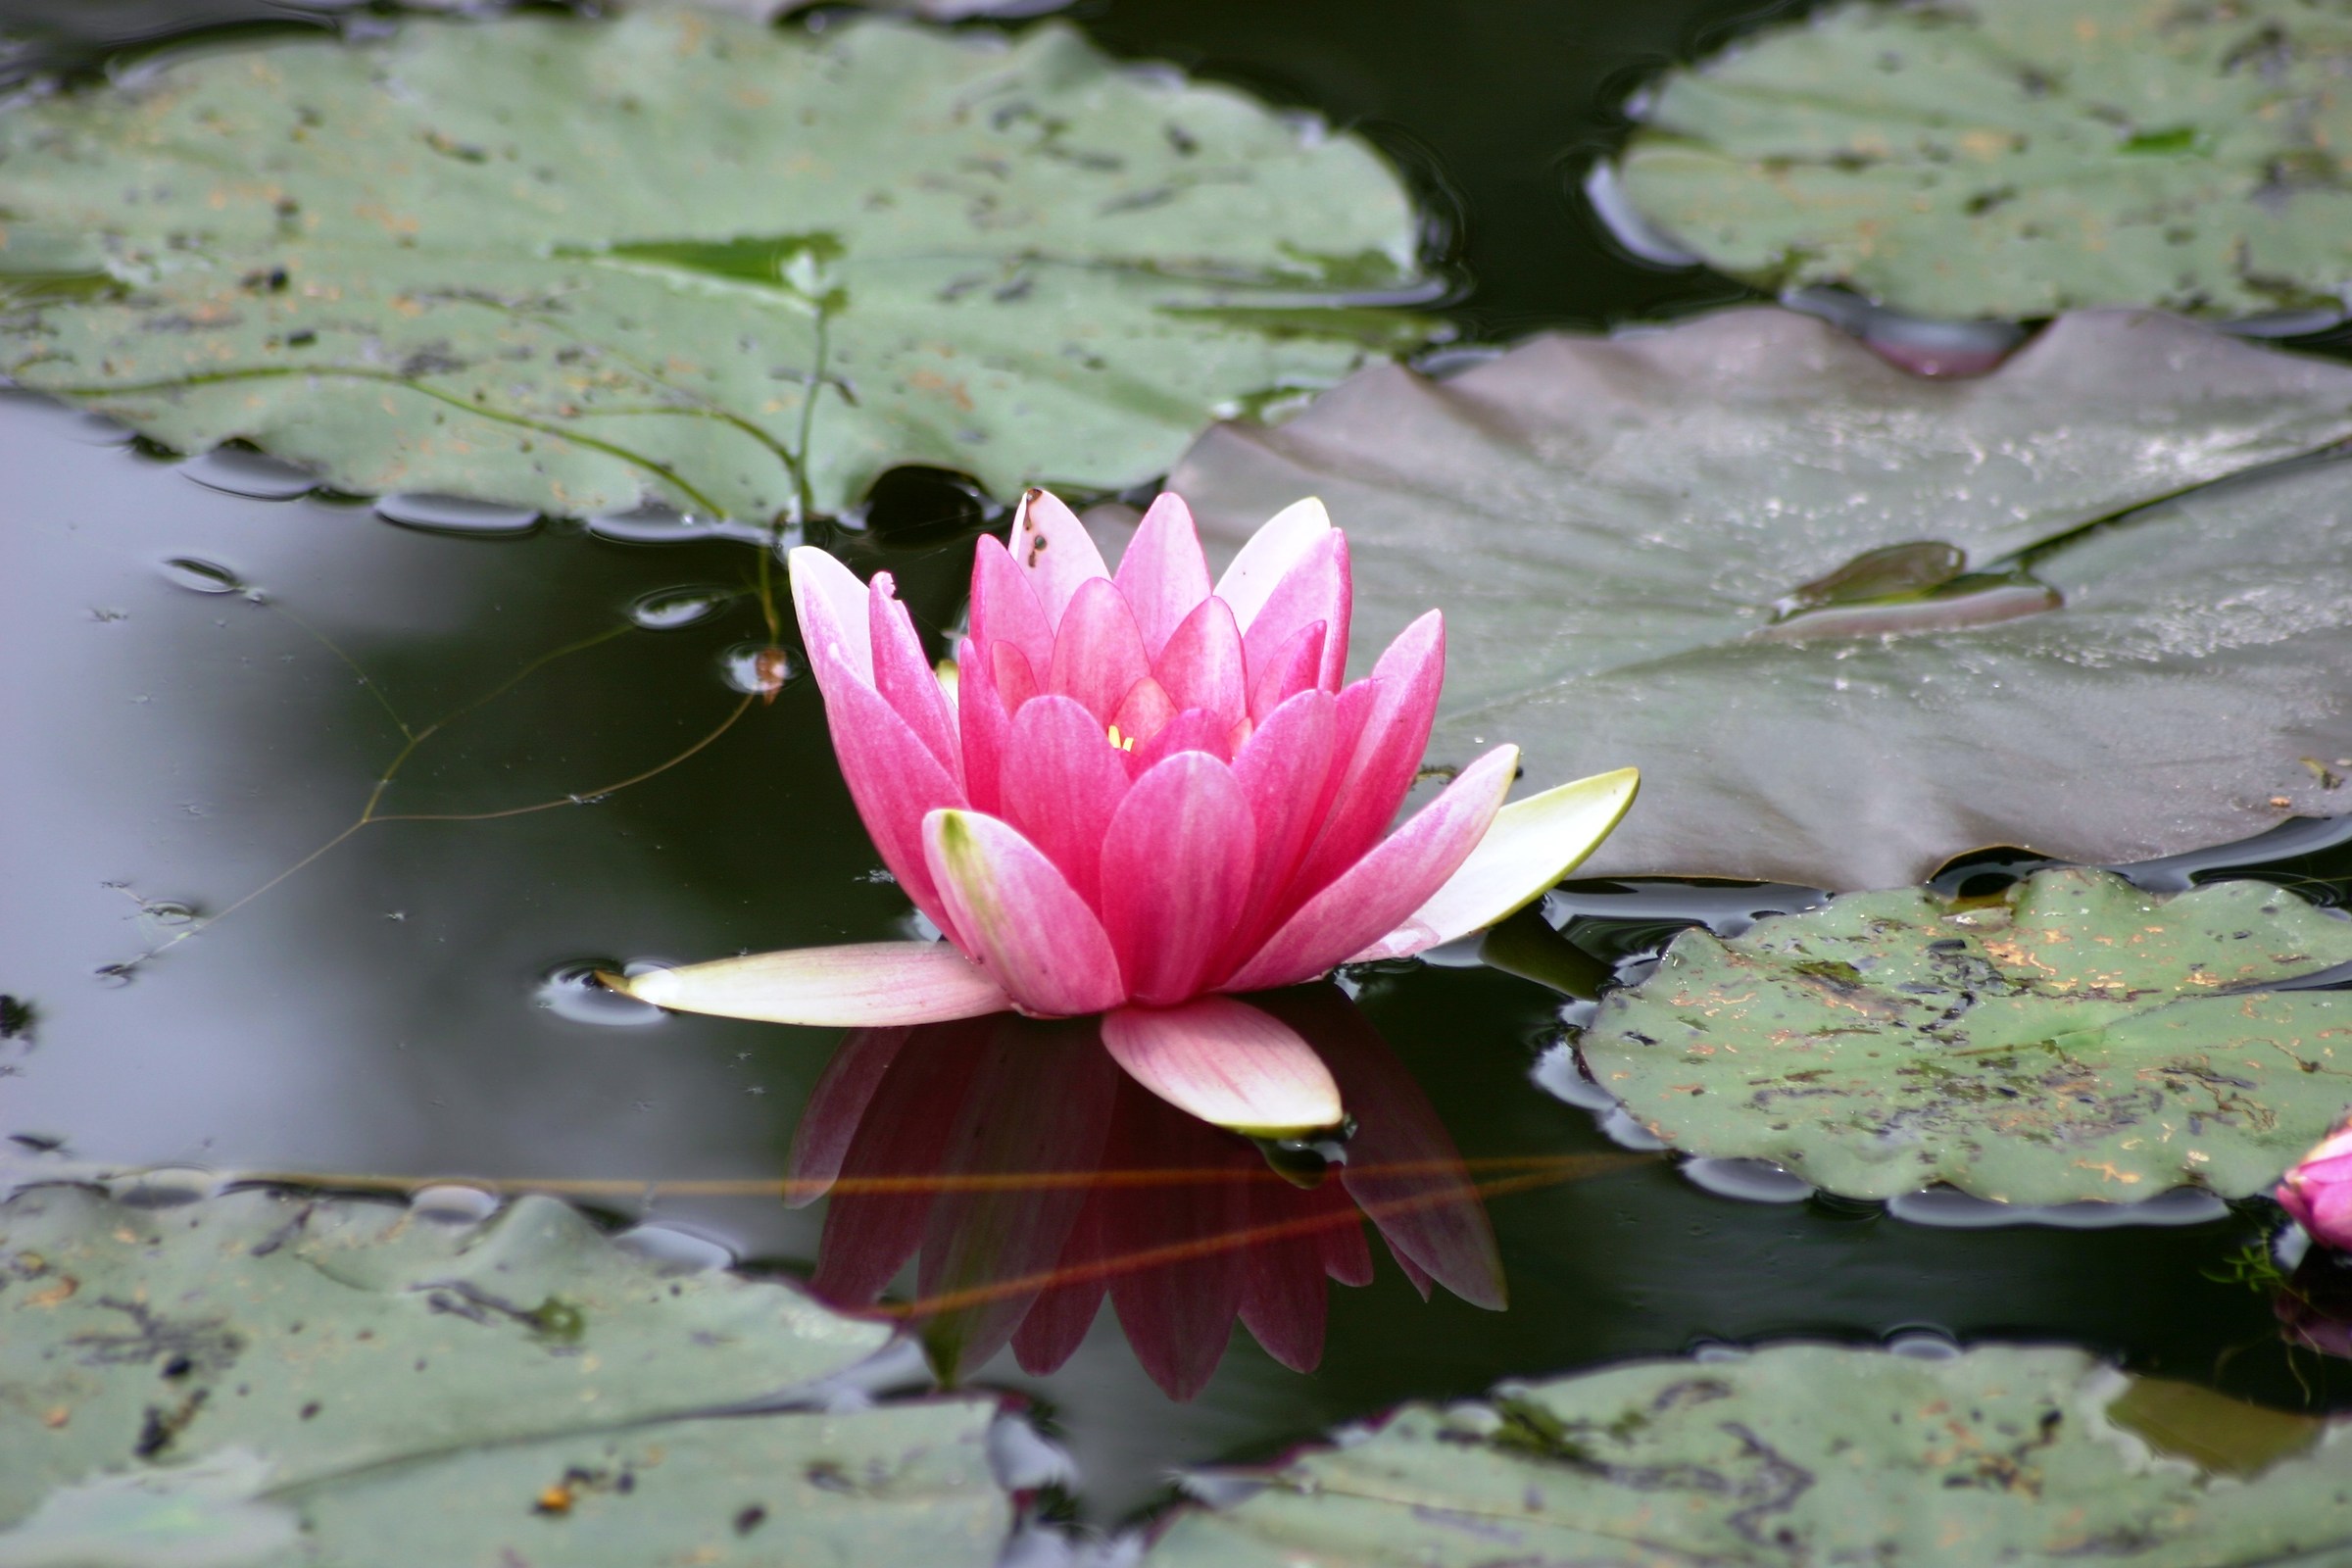 The pink water lily in the garden of Monet (Giverny)...